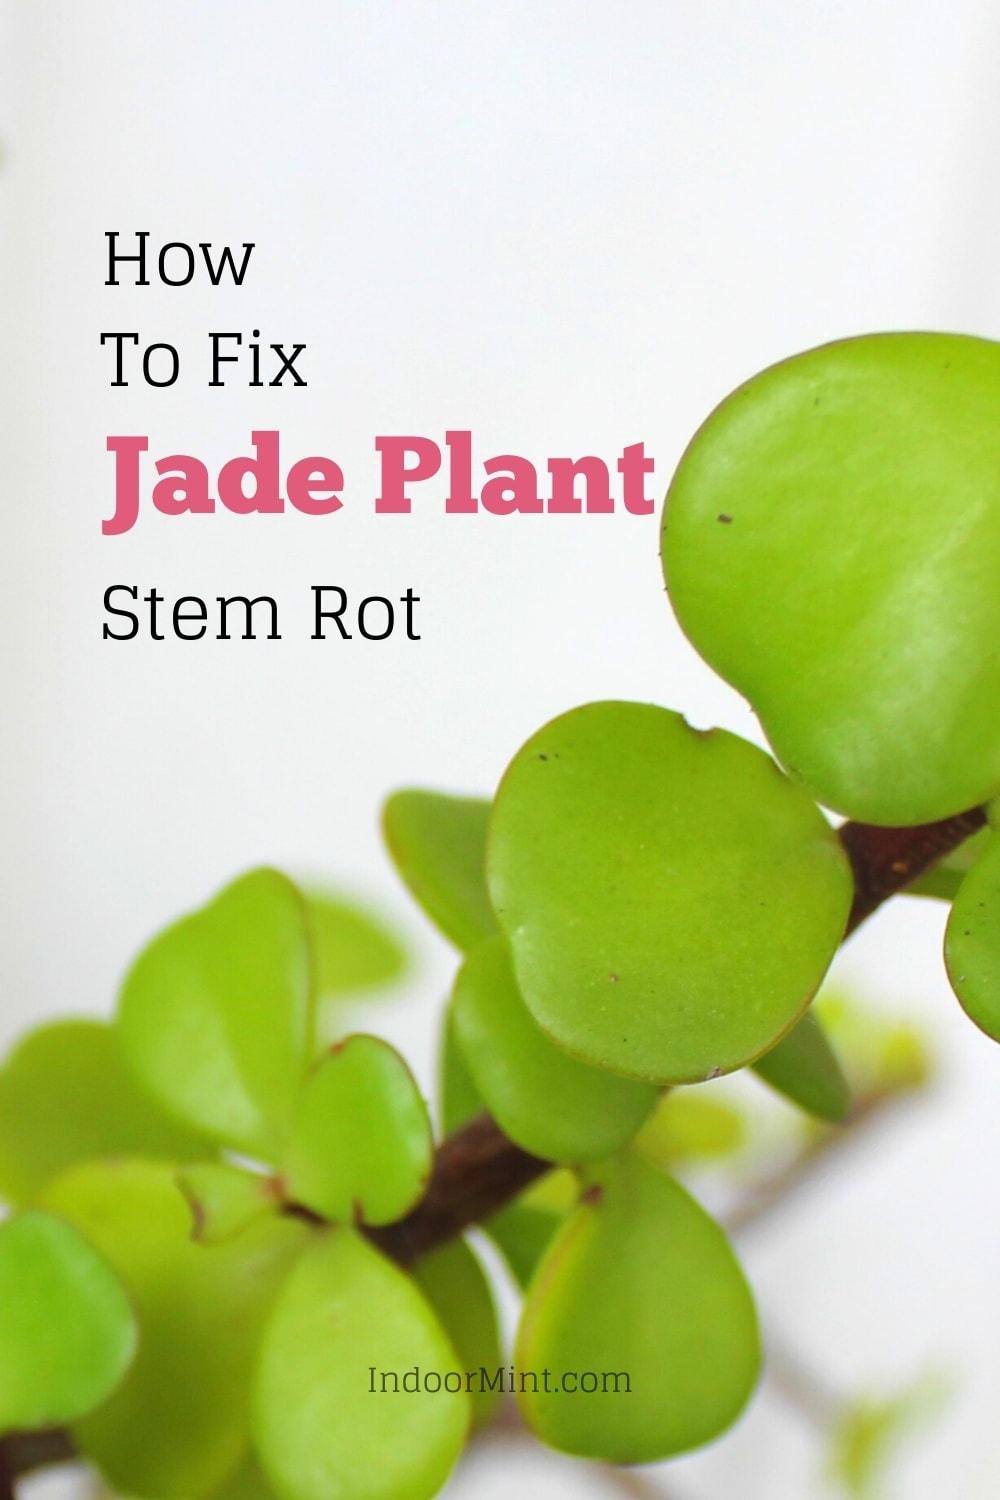 jade plant stem rot guide cover image